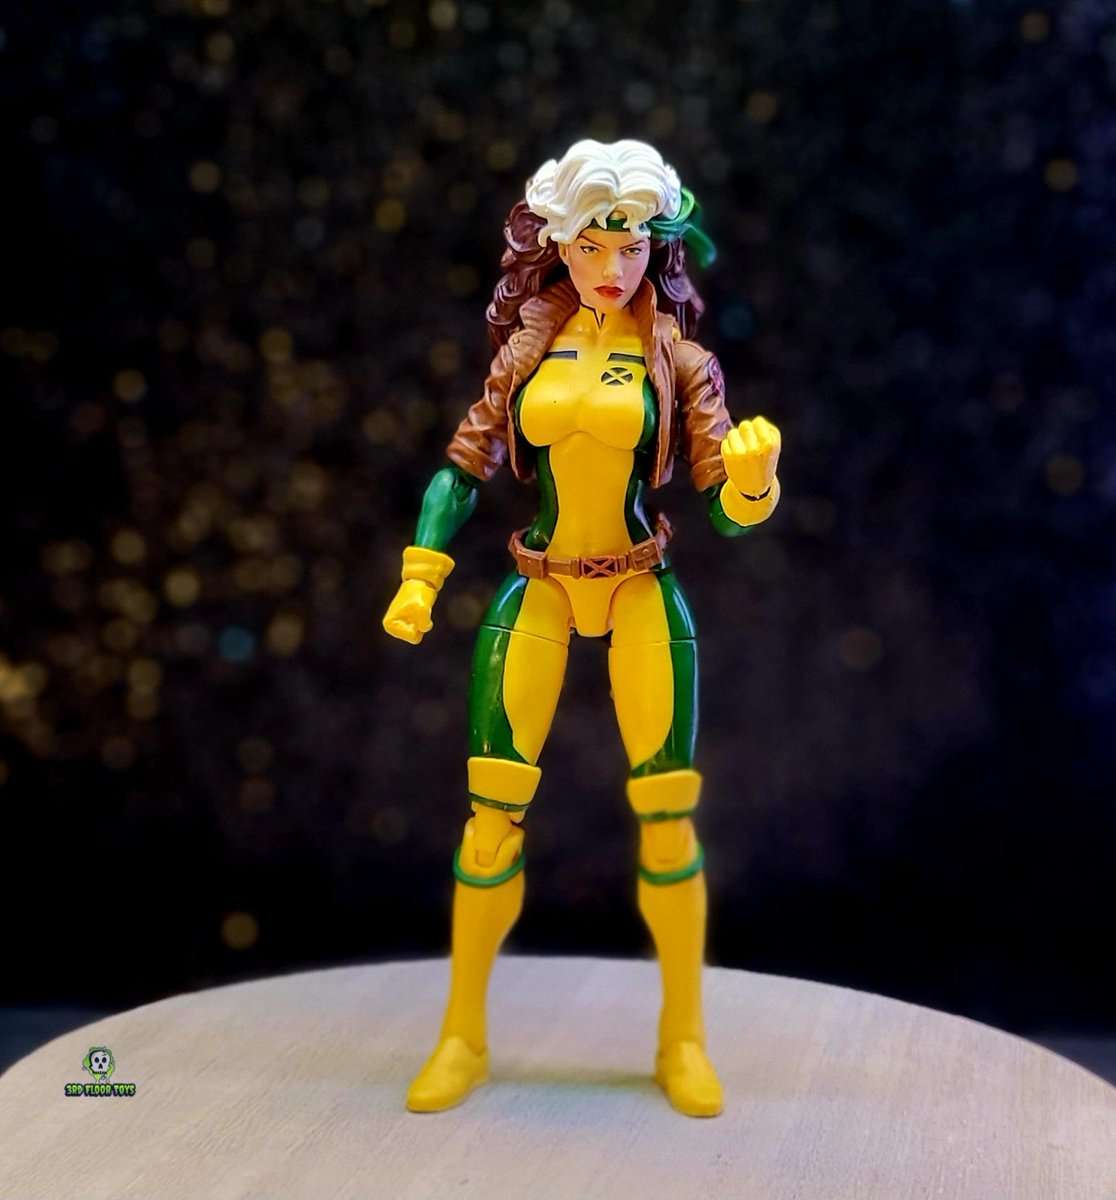 Figure Of The Day 13 - Marvel Legends Rogue (Retro). I love this figure. She is why I got into Hasbro Marvel Legends. 
#marvellegends #Rogue #xmen #Marvel #Hasbro #figureoftheday #toypics #toyphotography